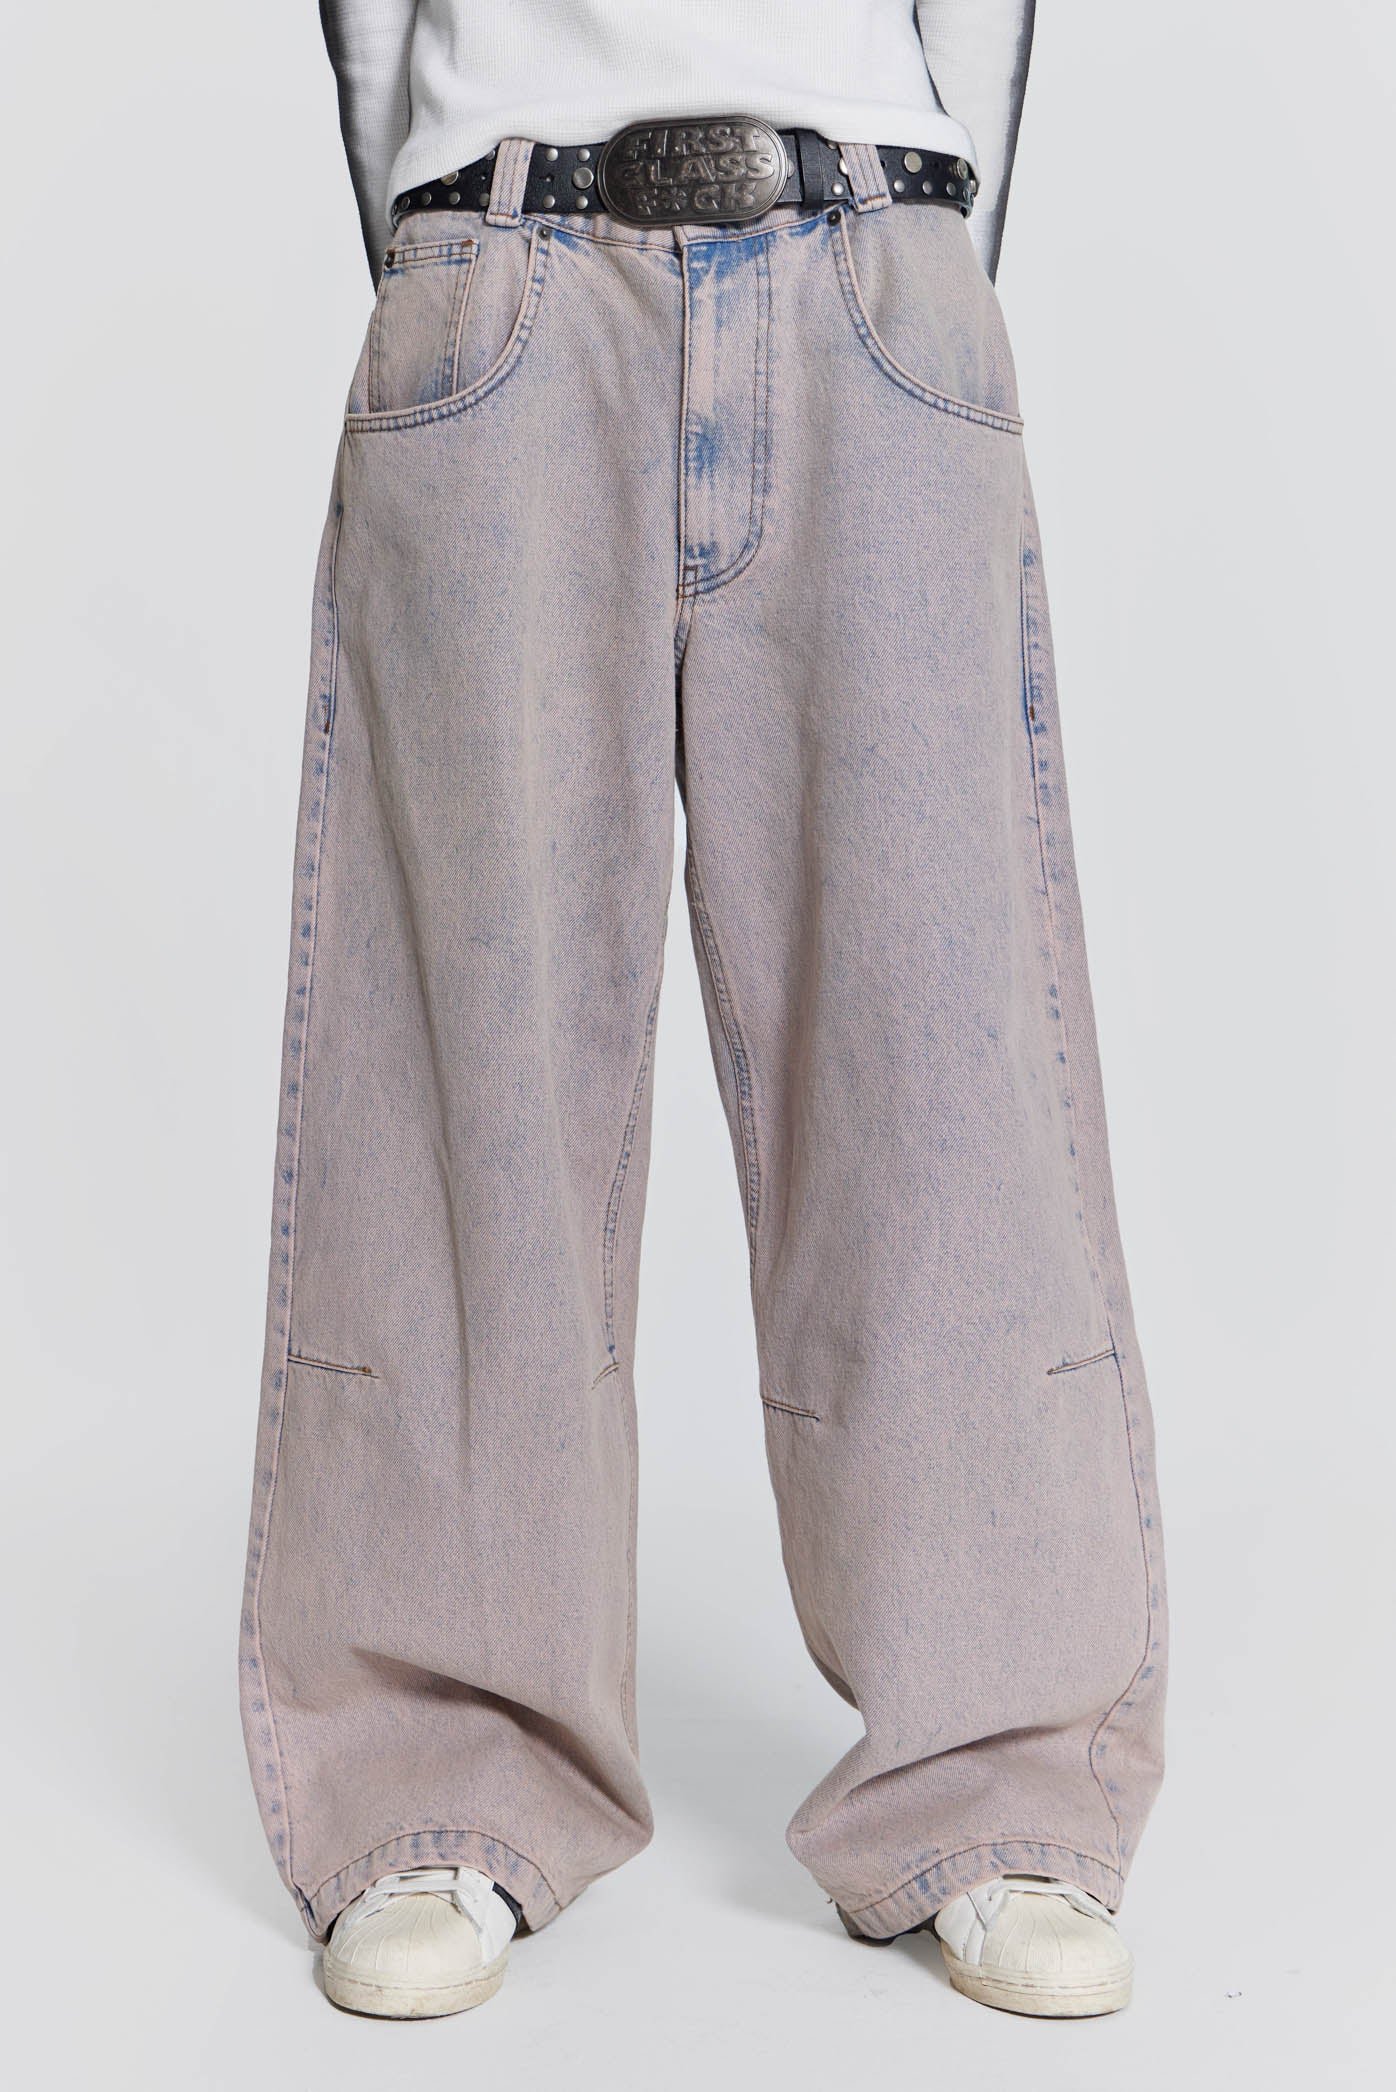 Pink Acid Wash Colossus Baggy Jeans | Jaded London